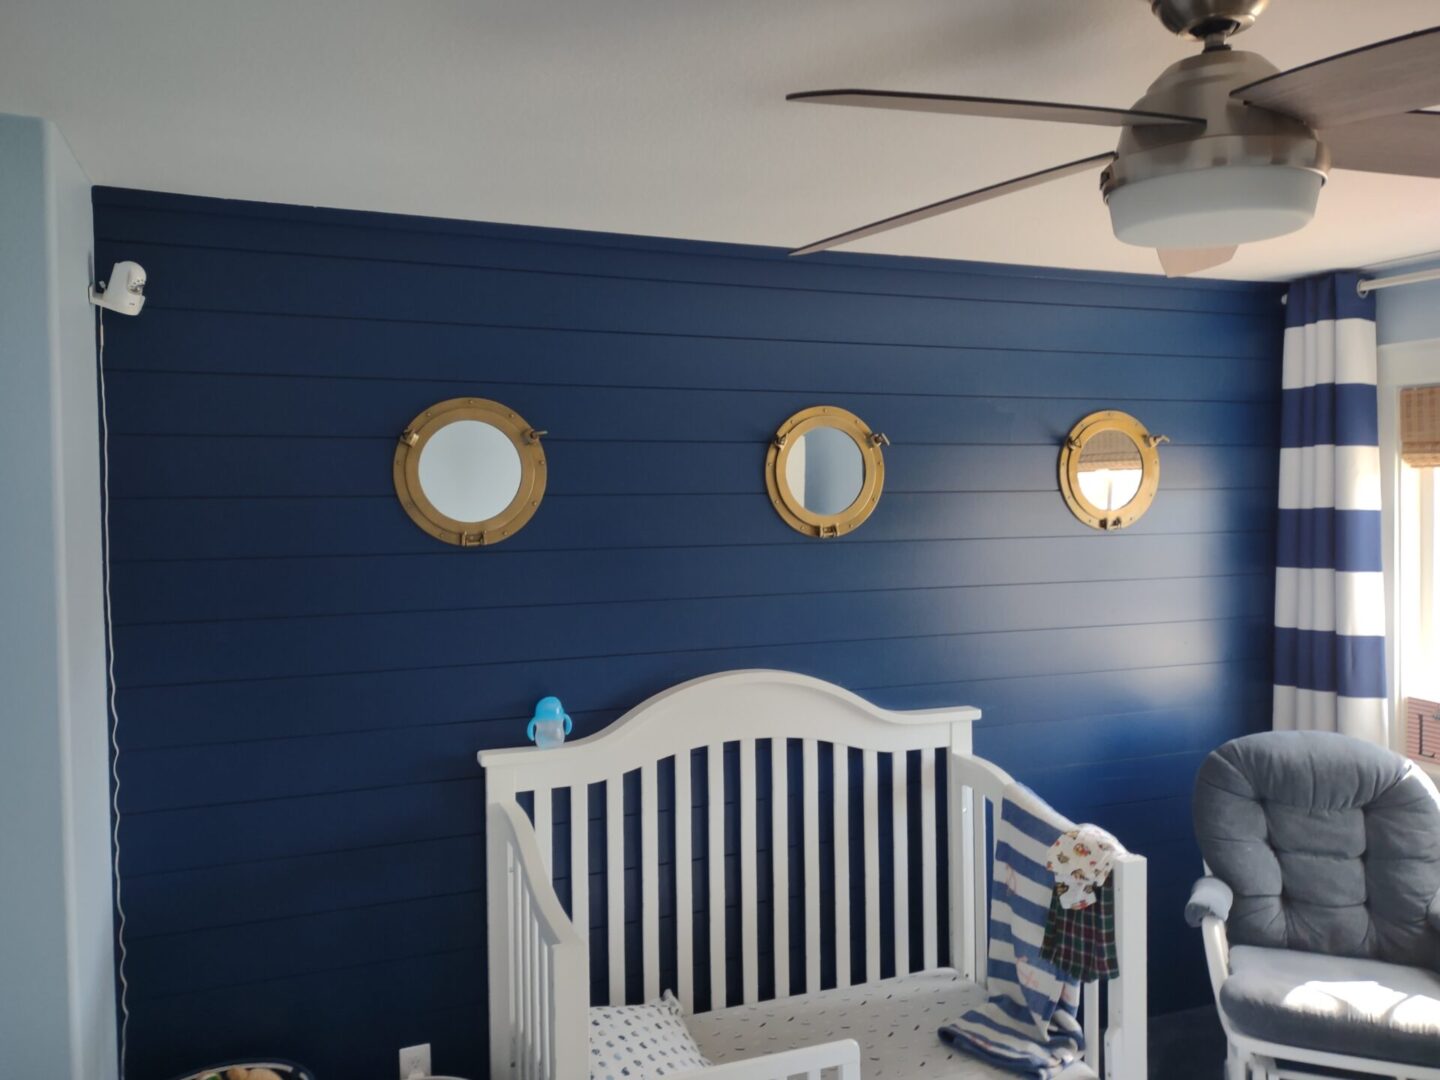 A baby 's room with blue walls and white furniture.